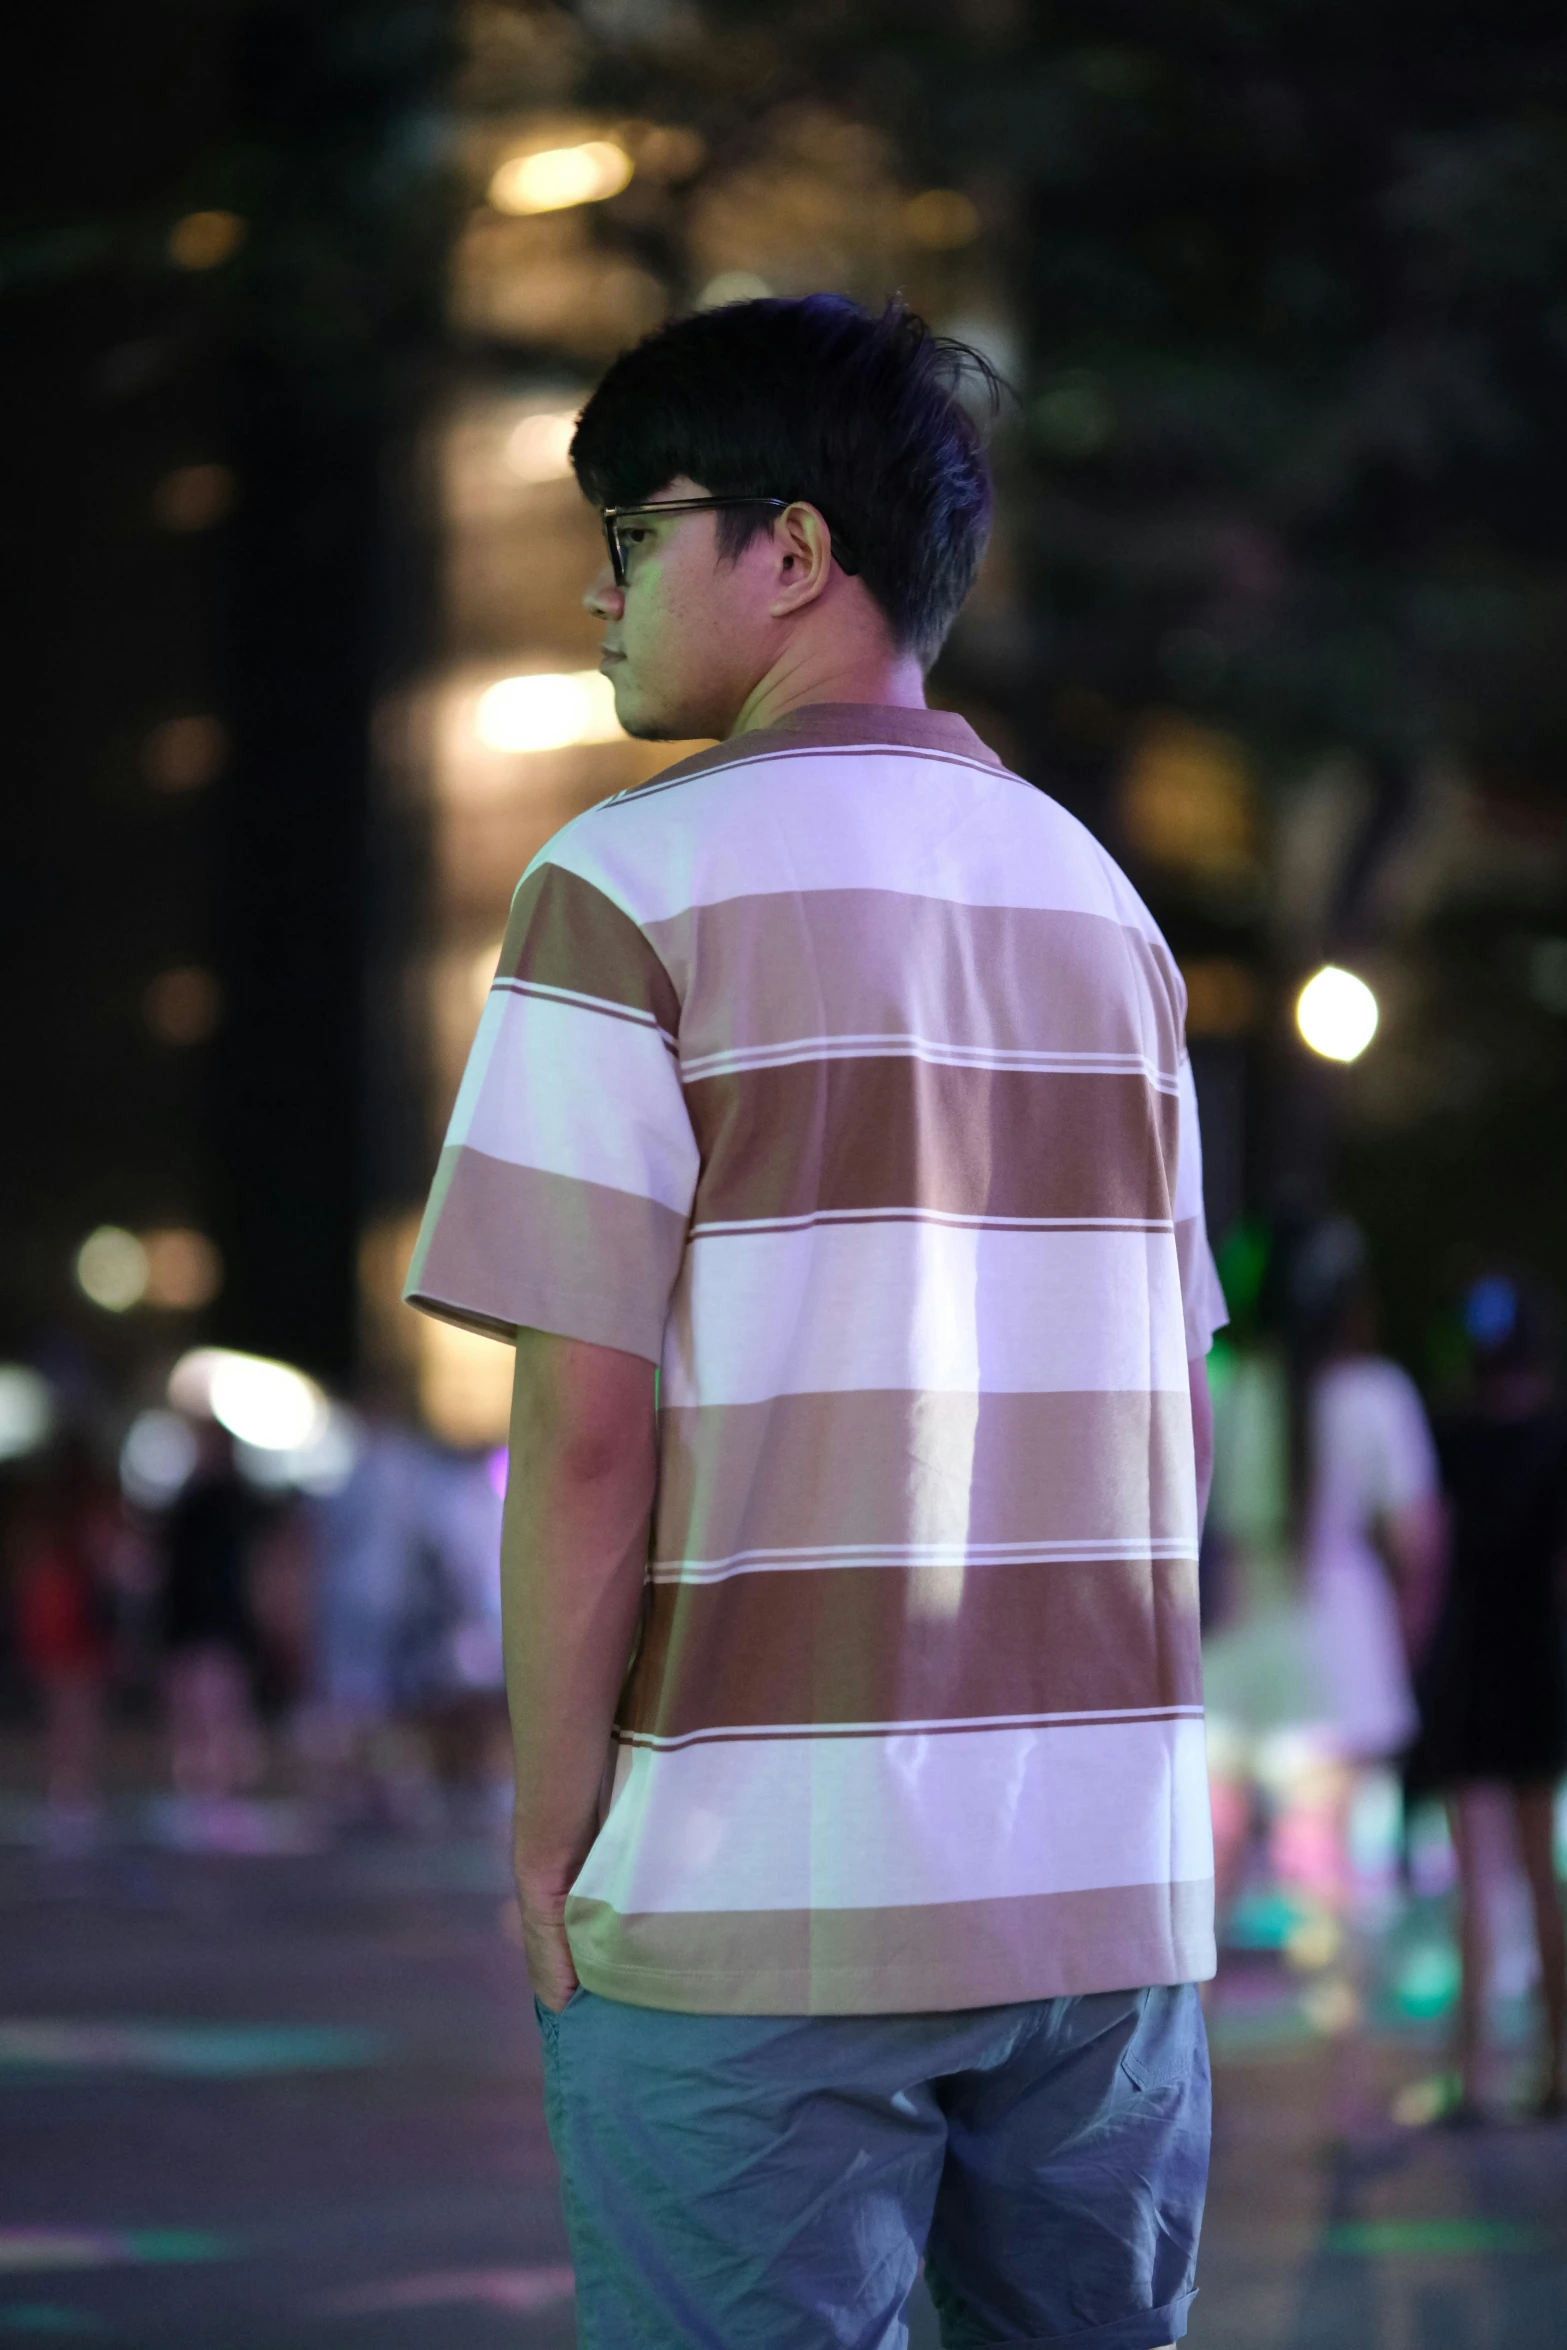 a guy standing alone in the street at night